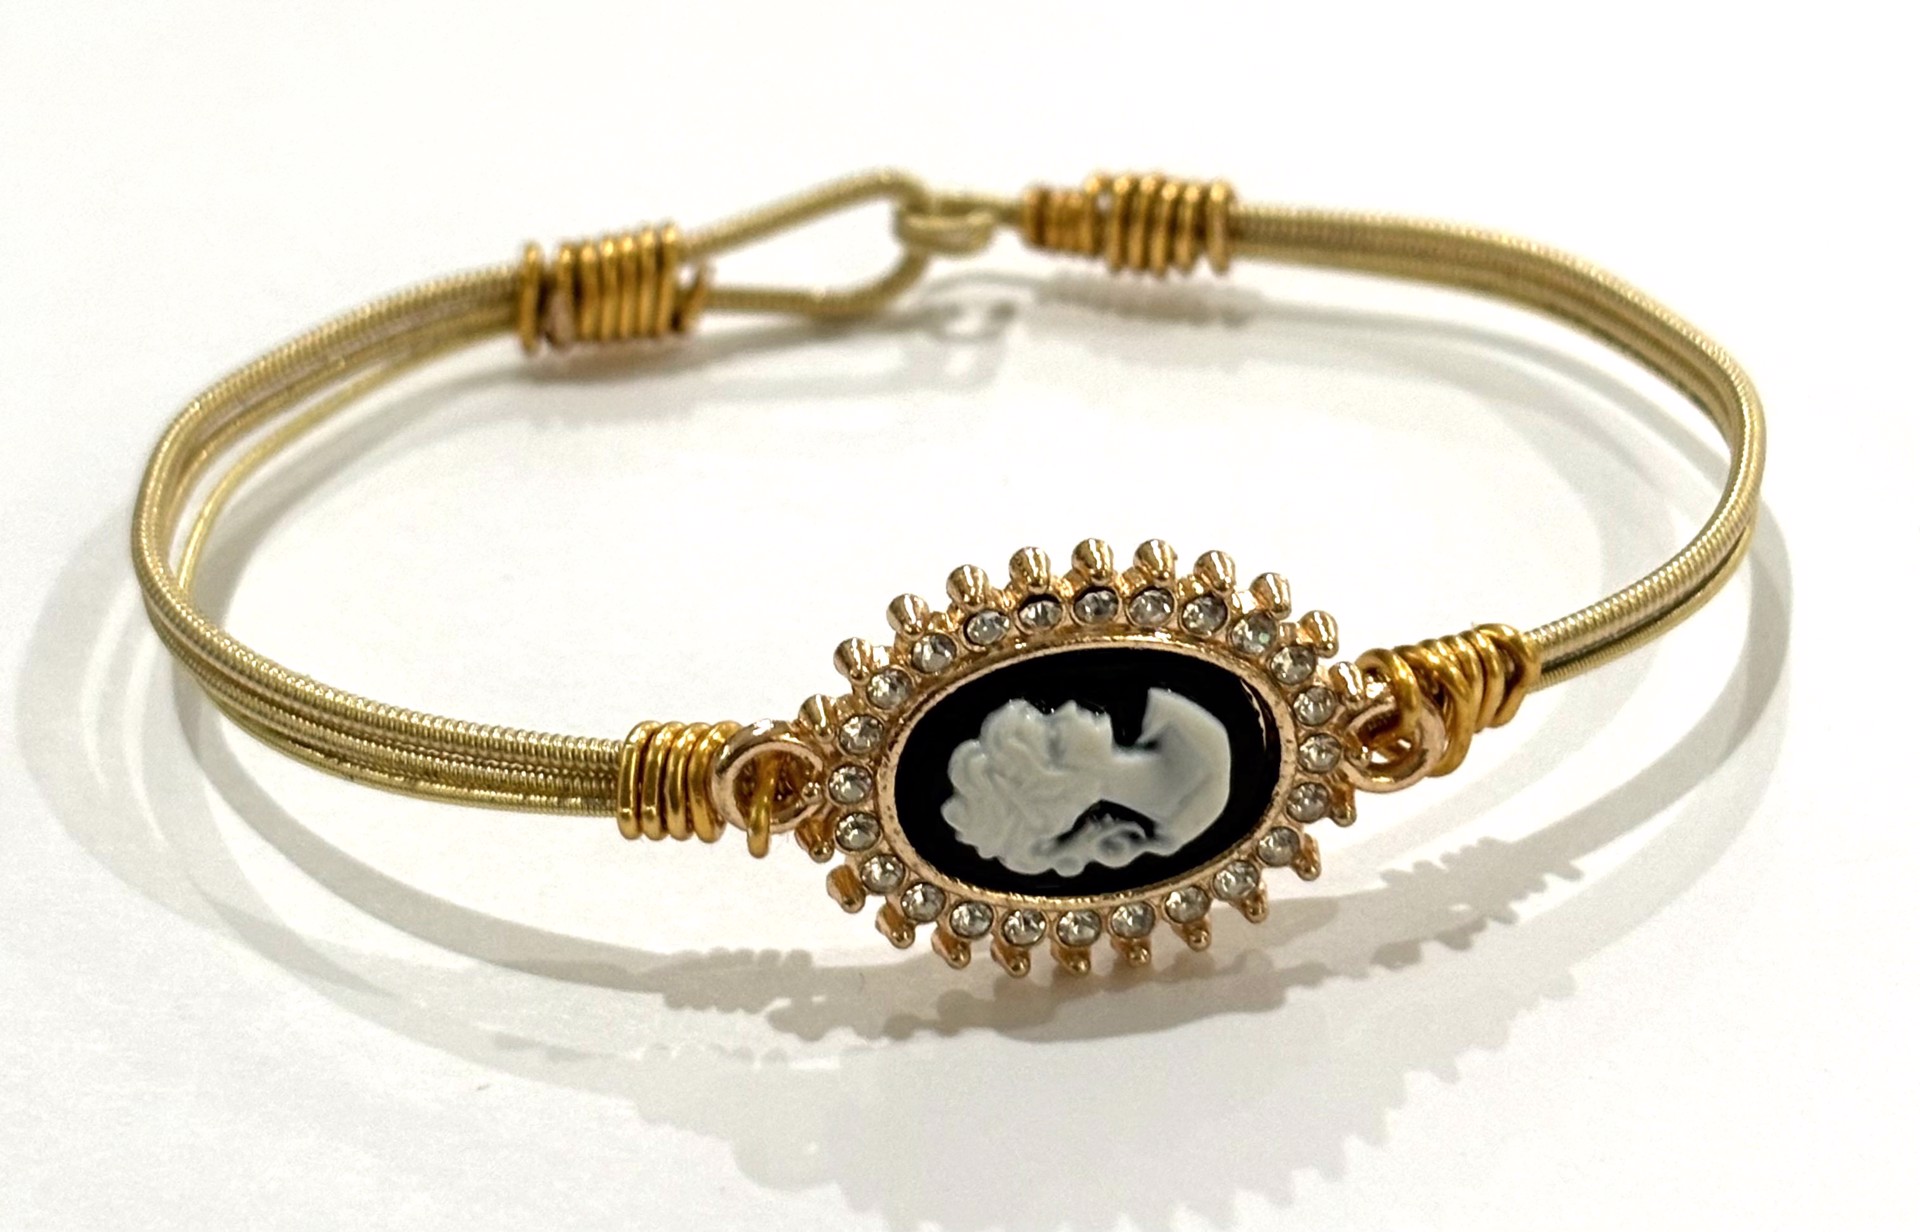 Cameo Guitar String Bracelet by String Thing Designs